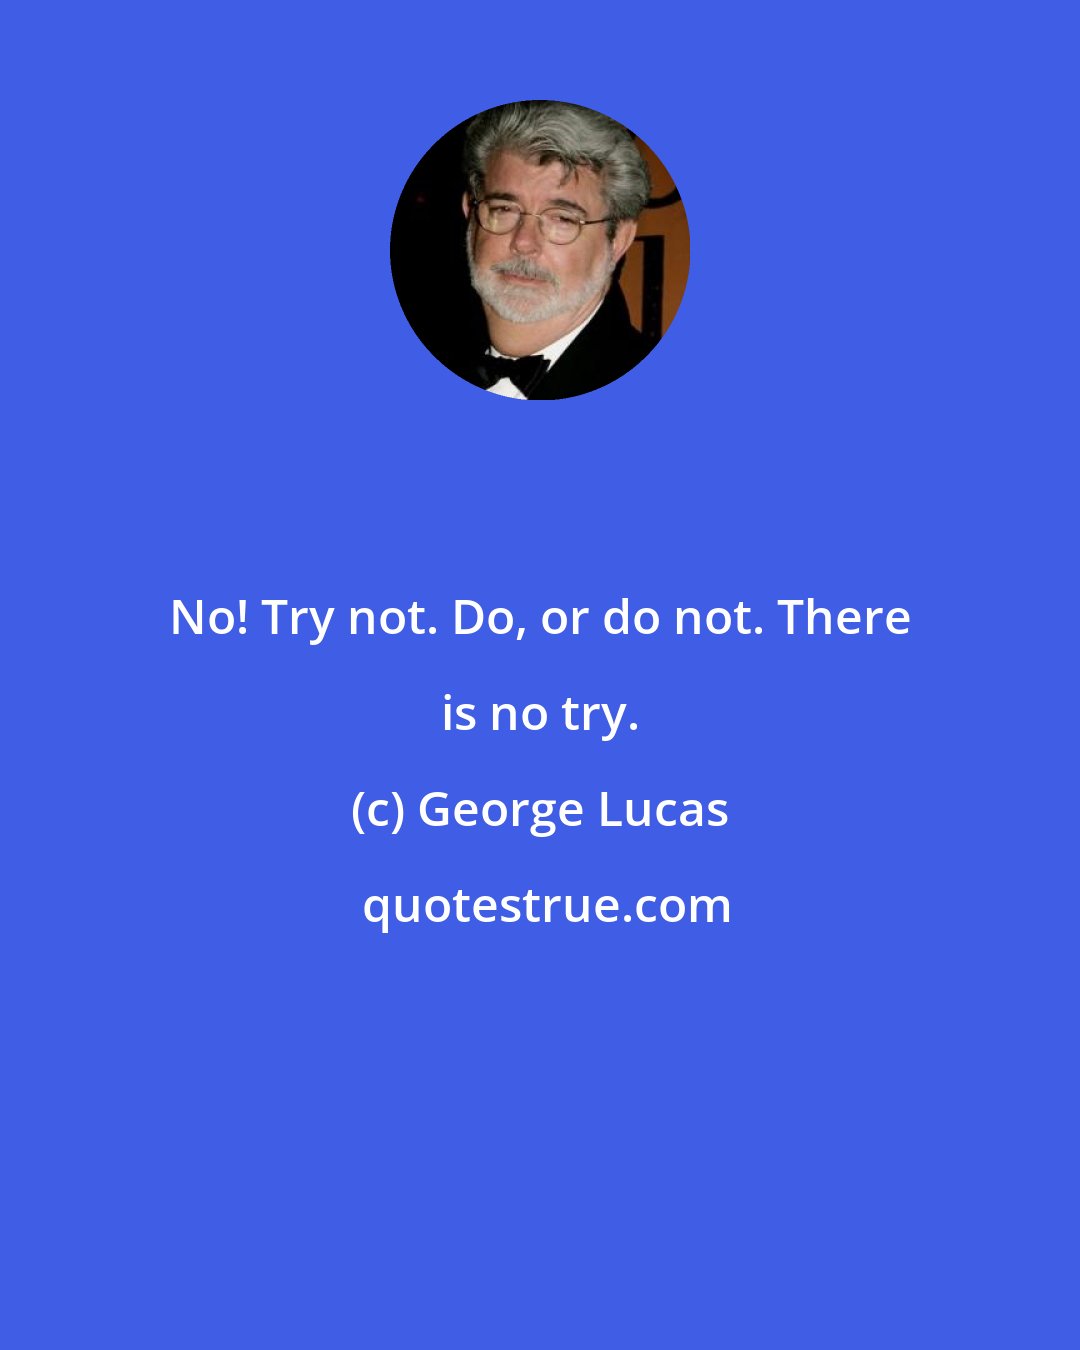 George Lucas: No! Try not. Do, or do not. There is no try.